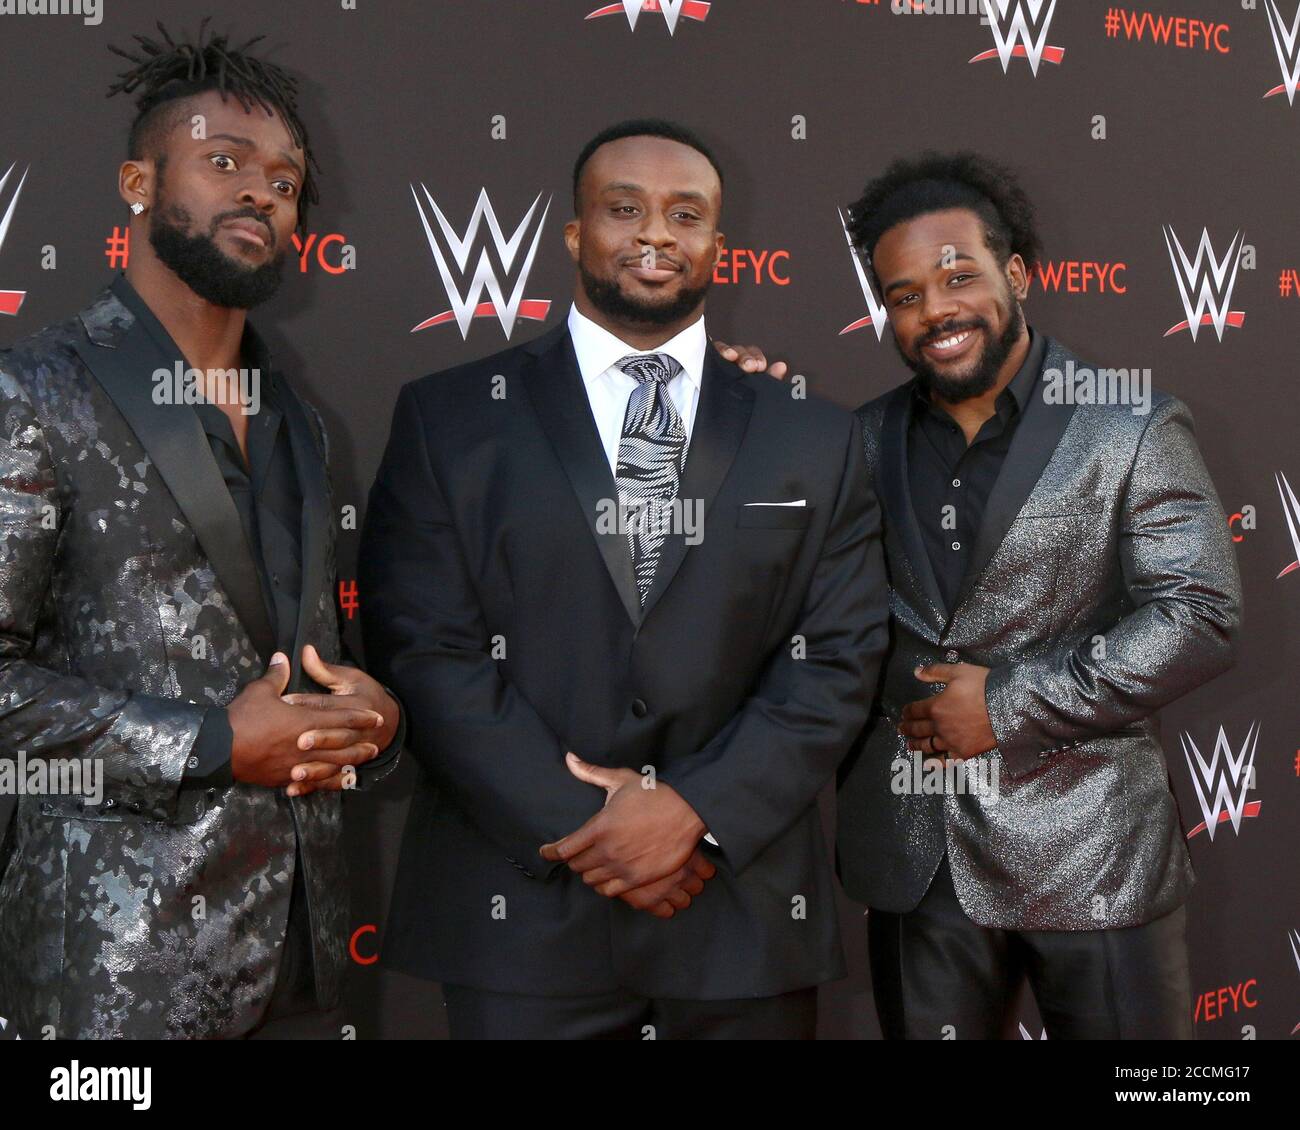 LOS ANGELES - JUN 6:  Kofi Kingston, Big E, Xavier Woods, The New Day at the WWE For Your Consideration Event at the TV Academy Saban Media Center on June 6, 2018 in North Hollywood, CA Stock Photo